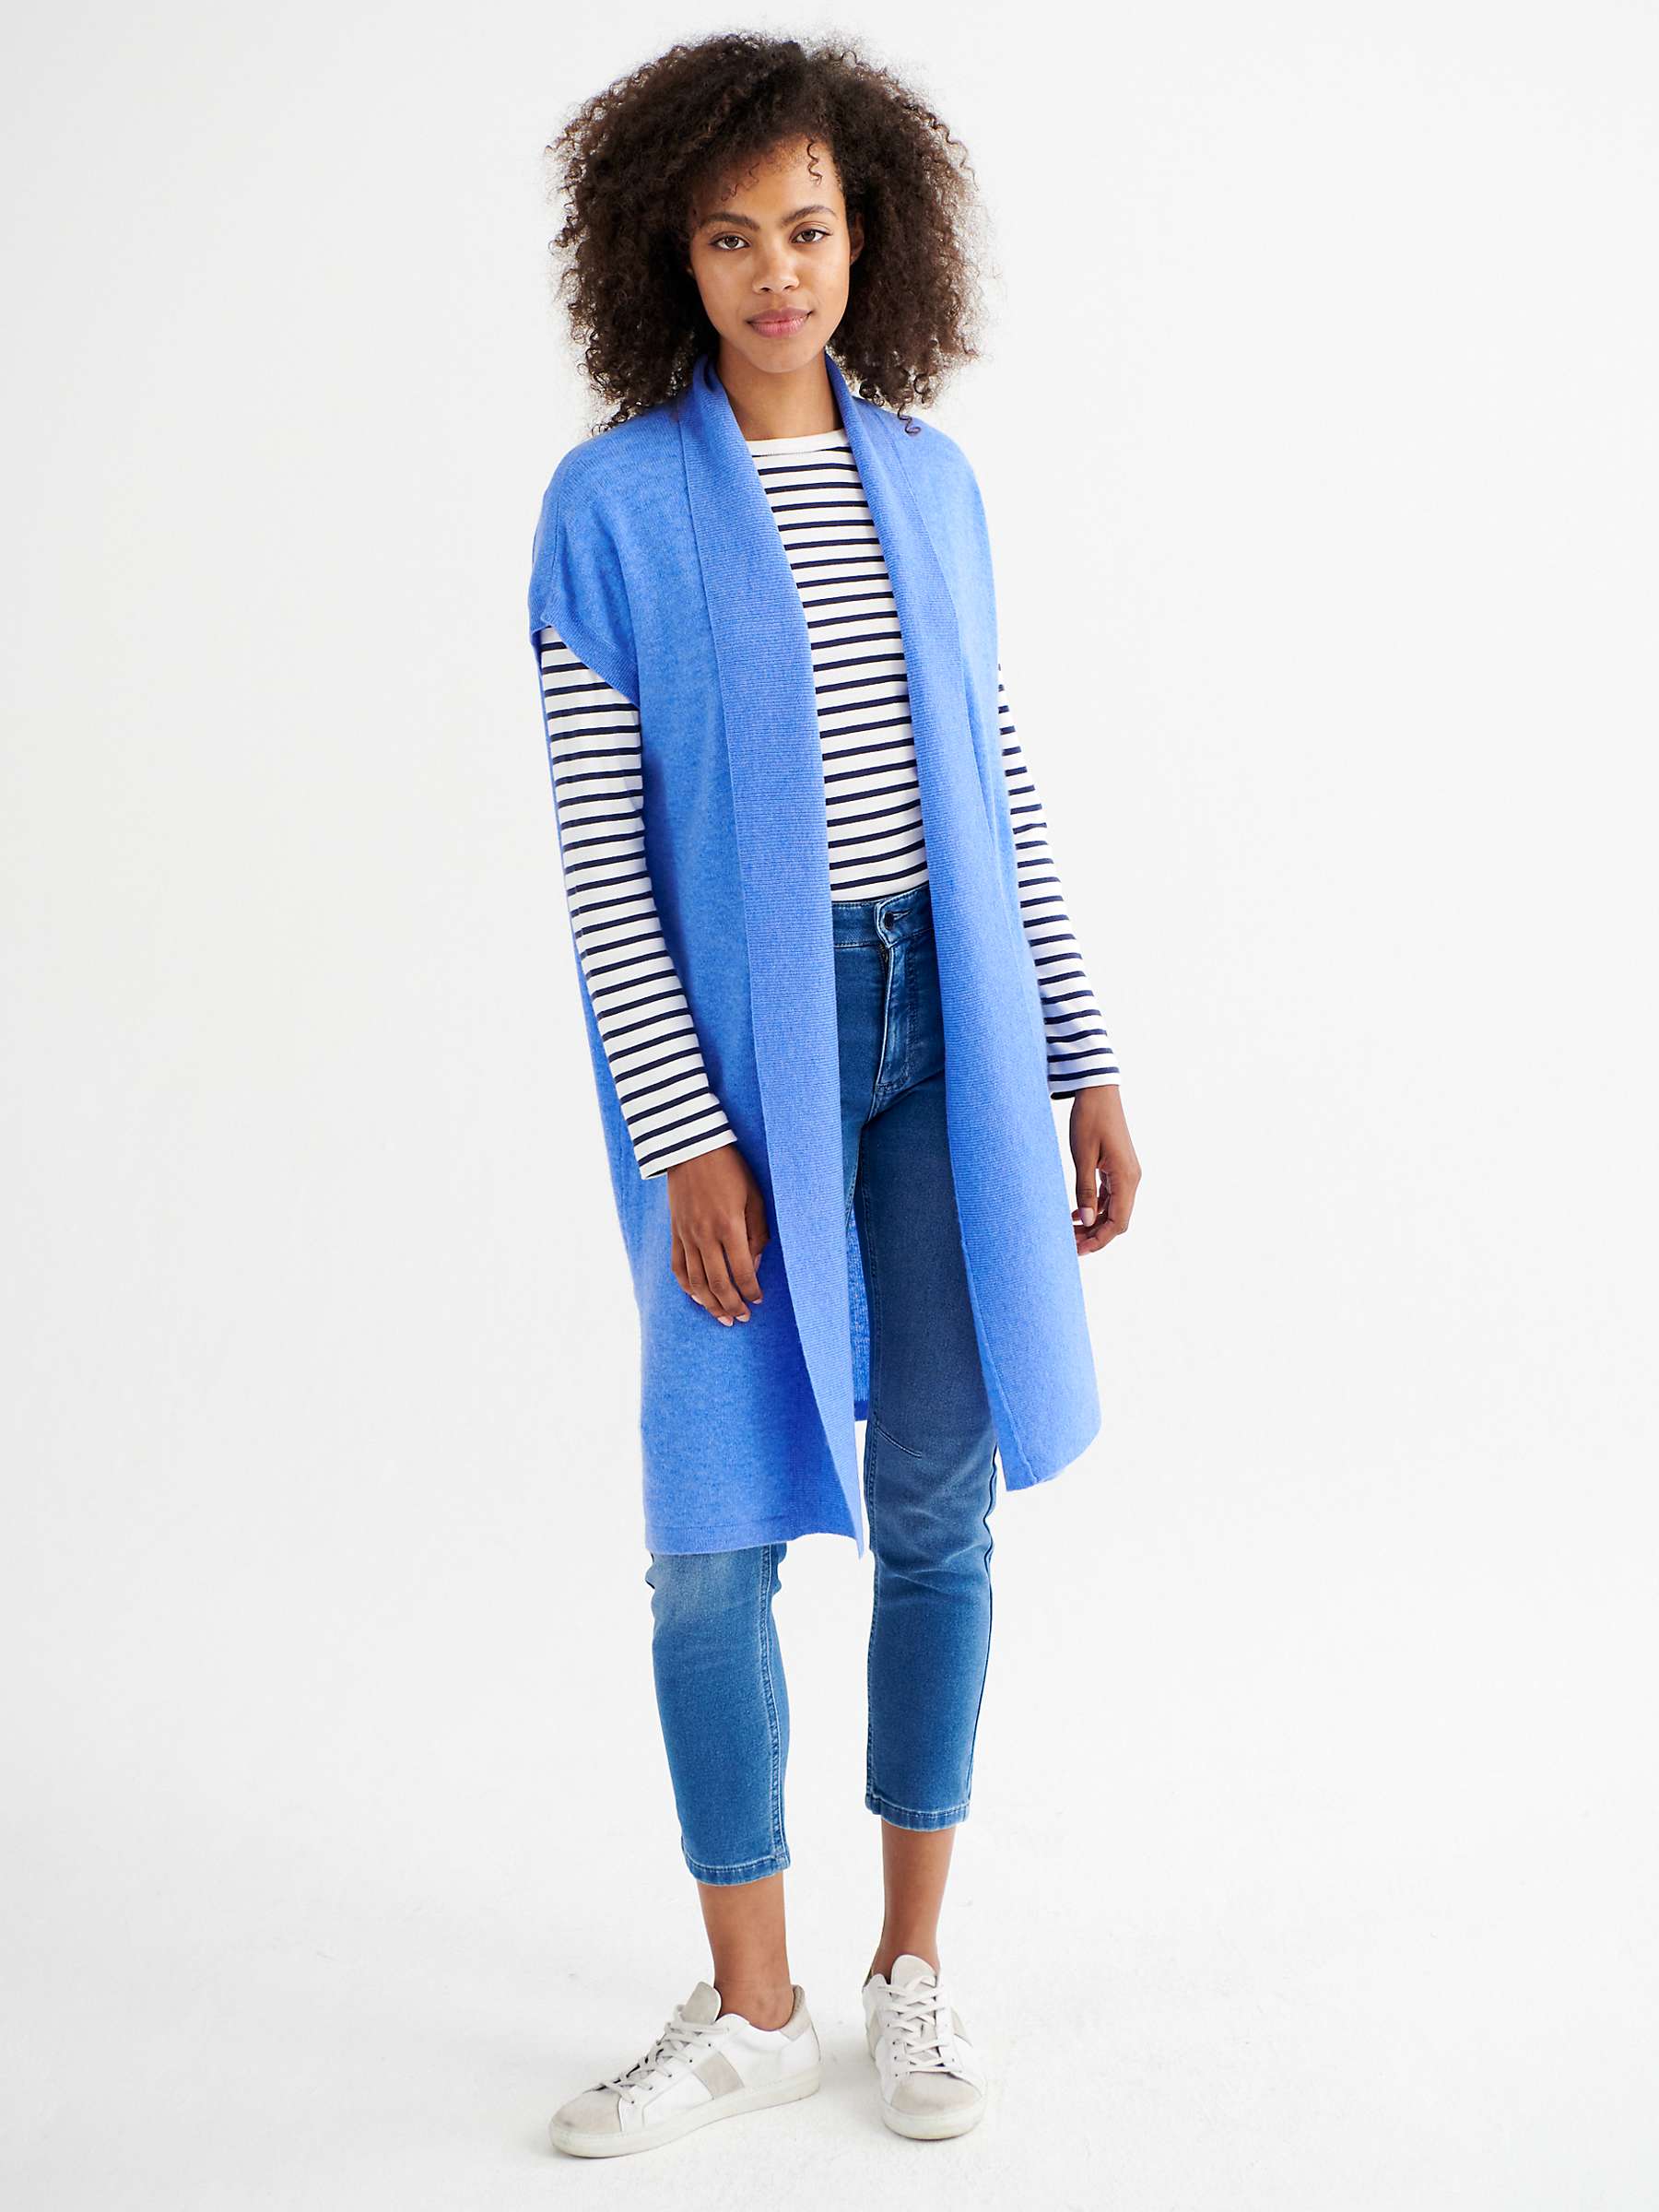 Buy NRBY Suzie Longline Sleeveless Cashmere Cardigan, Heathered Blue Bell Online at johnlewis.com